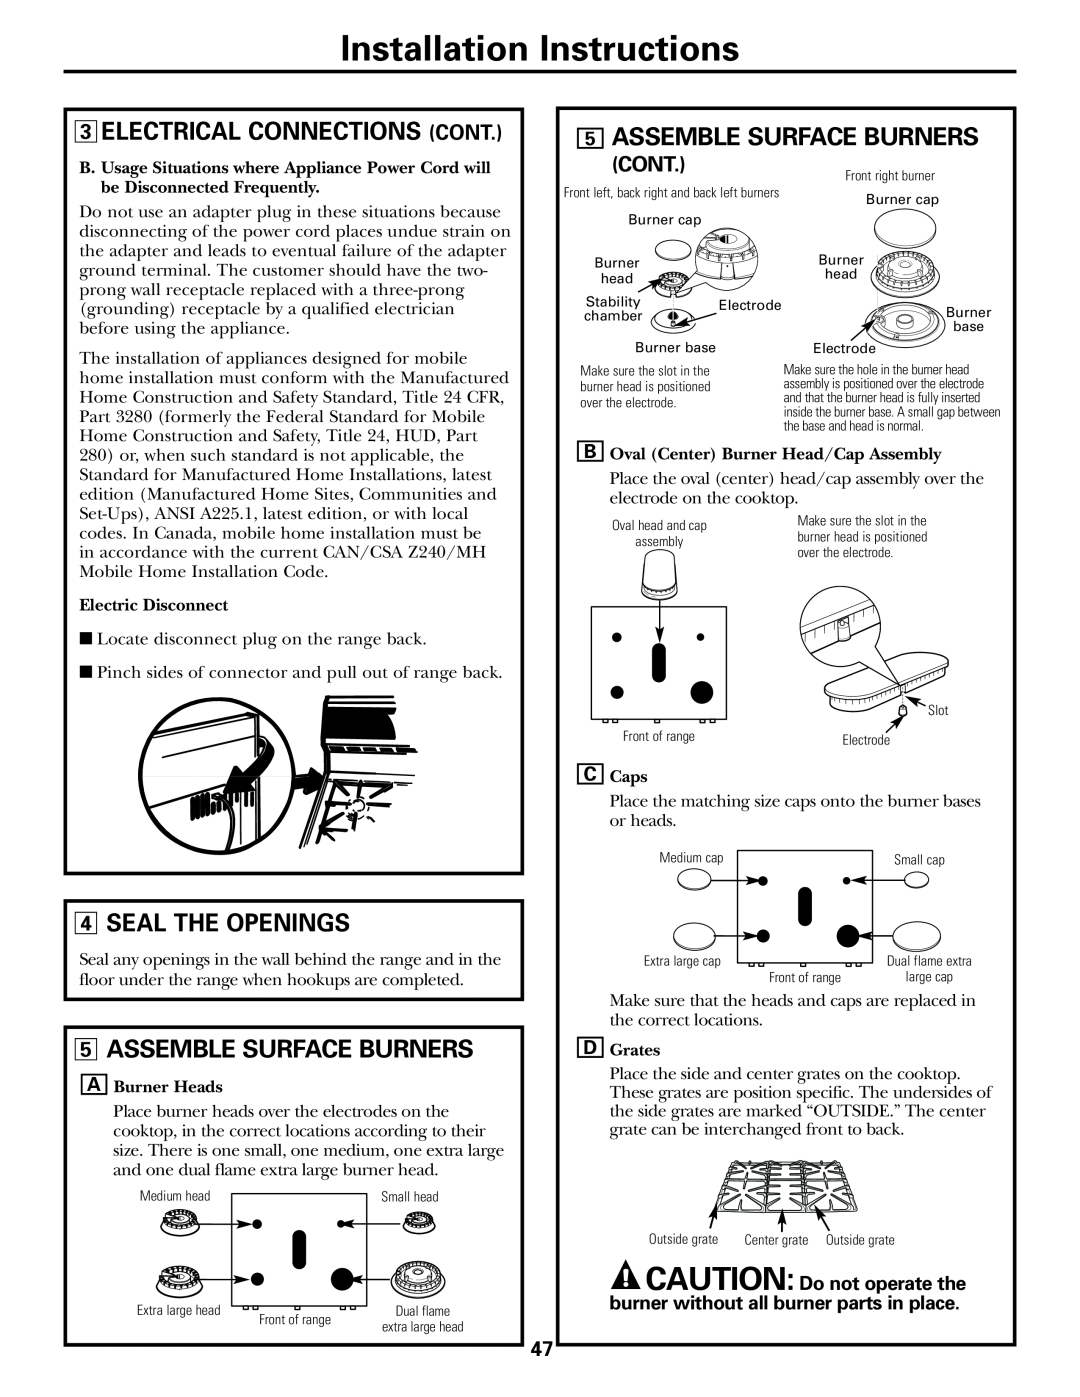 GE CGS980 Seal The Openings, Assemble Surface Burners, Electrical Connections Cont, Installation Instructions 